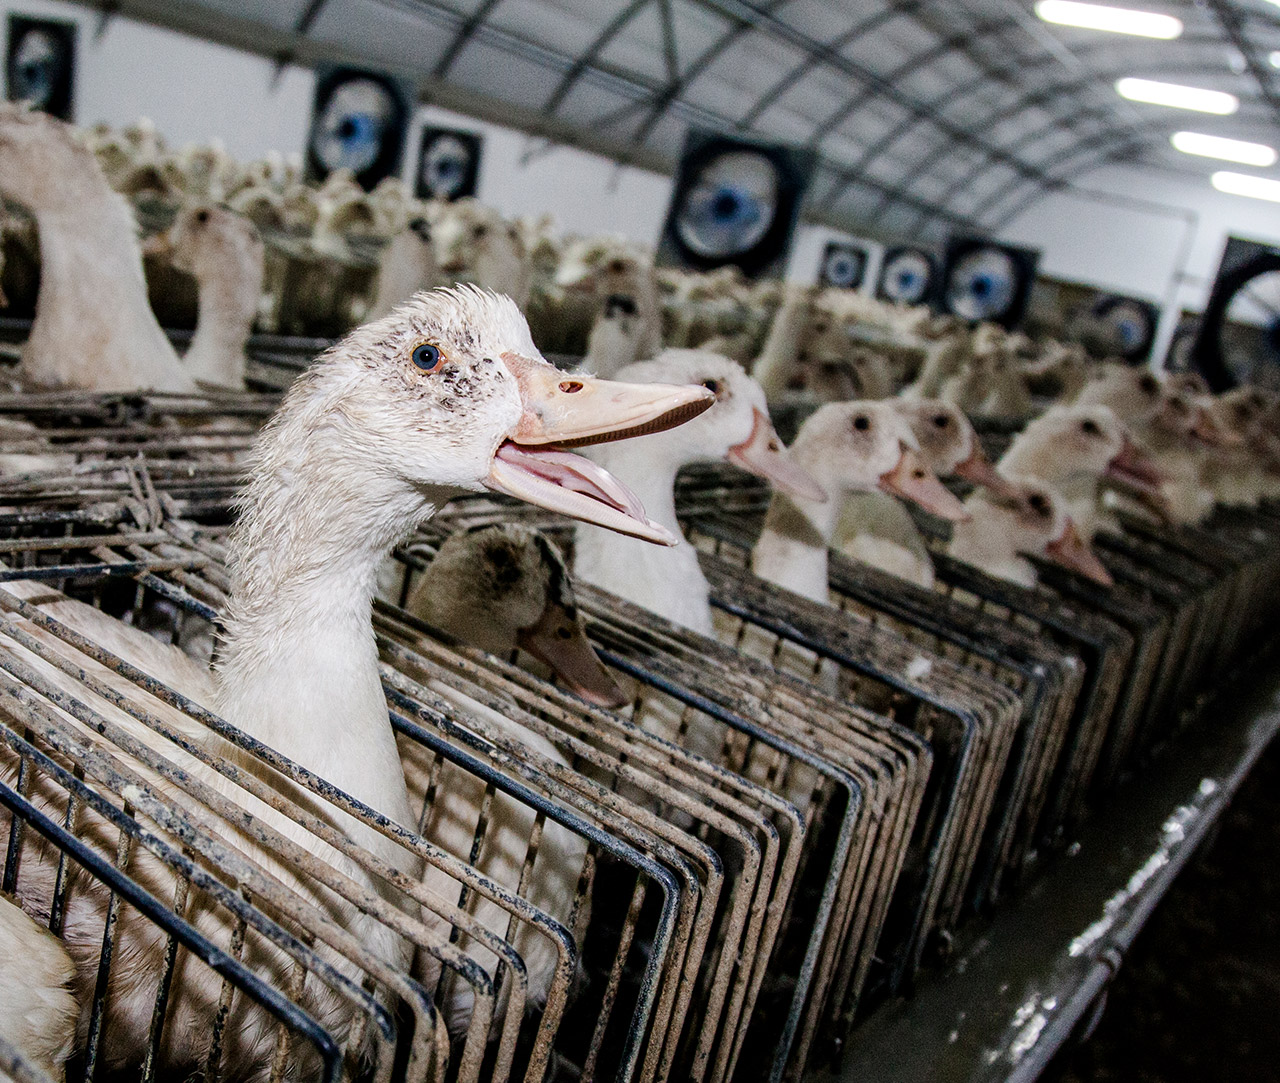 Ducks in cages for production of foie gras